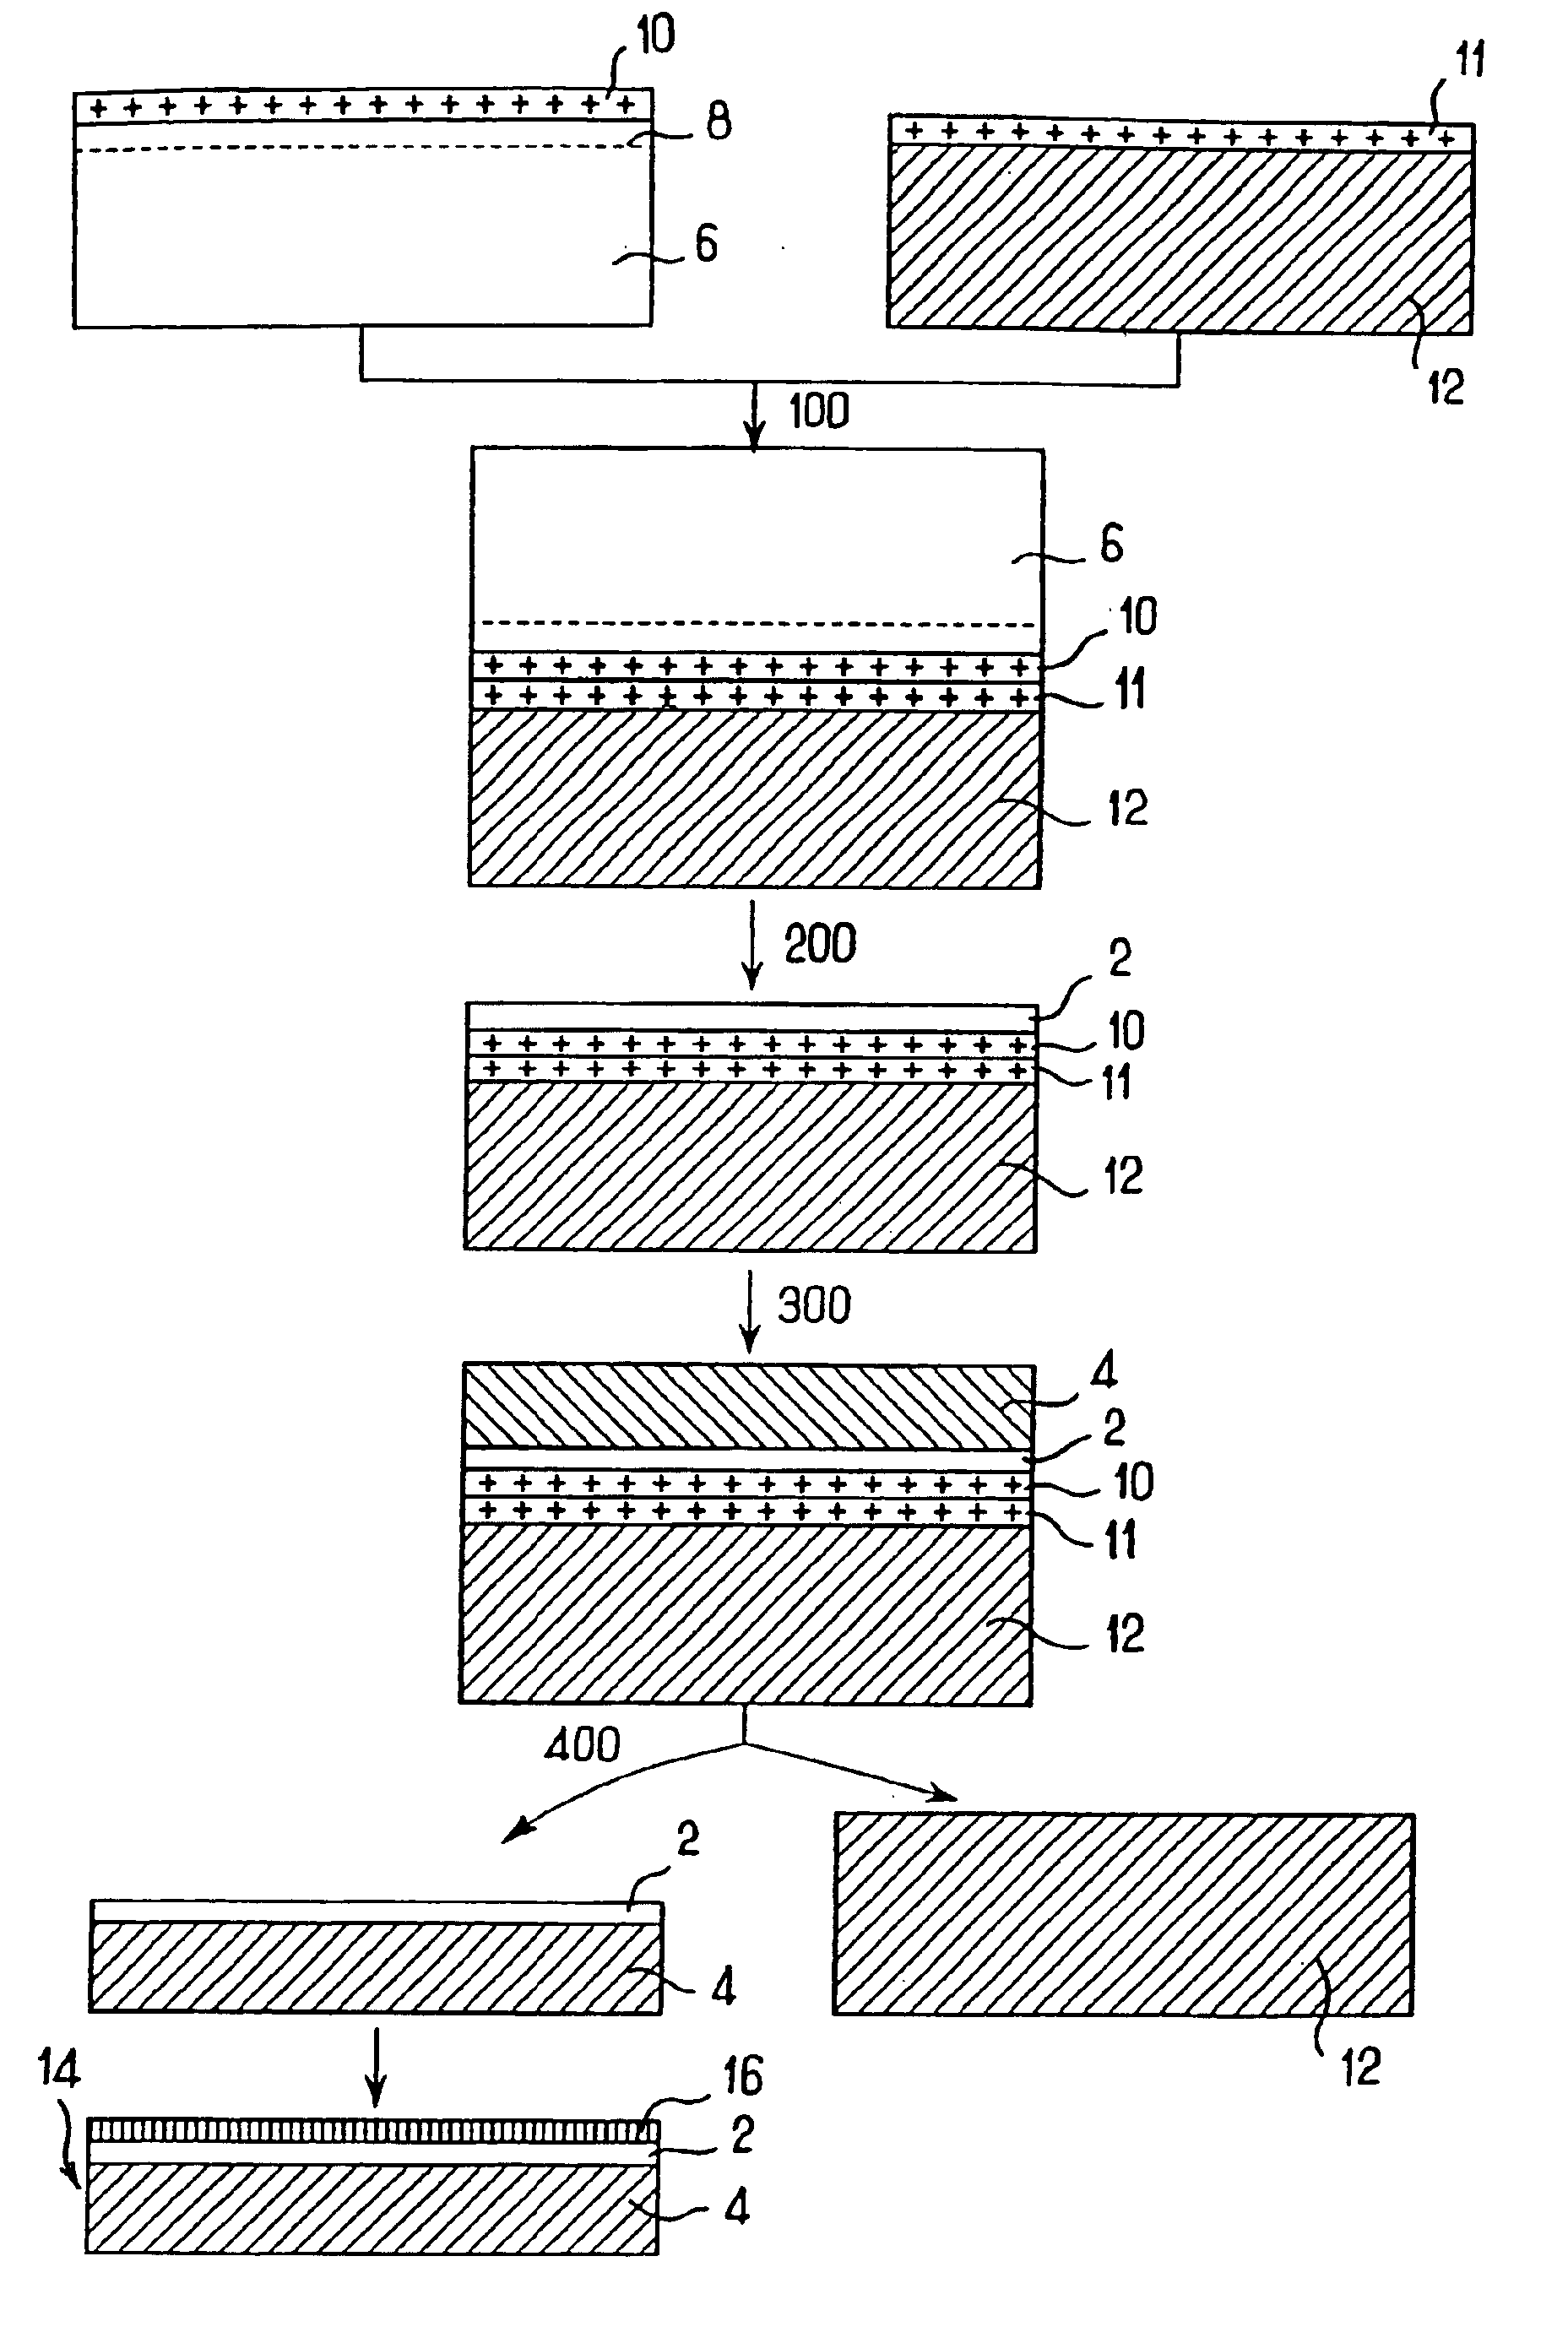 Methods for fabricating final substrates